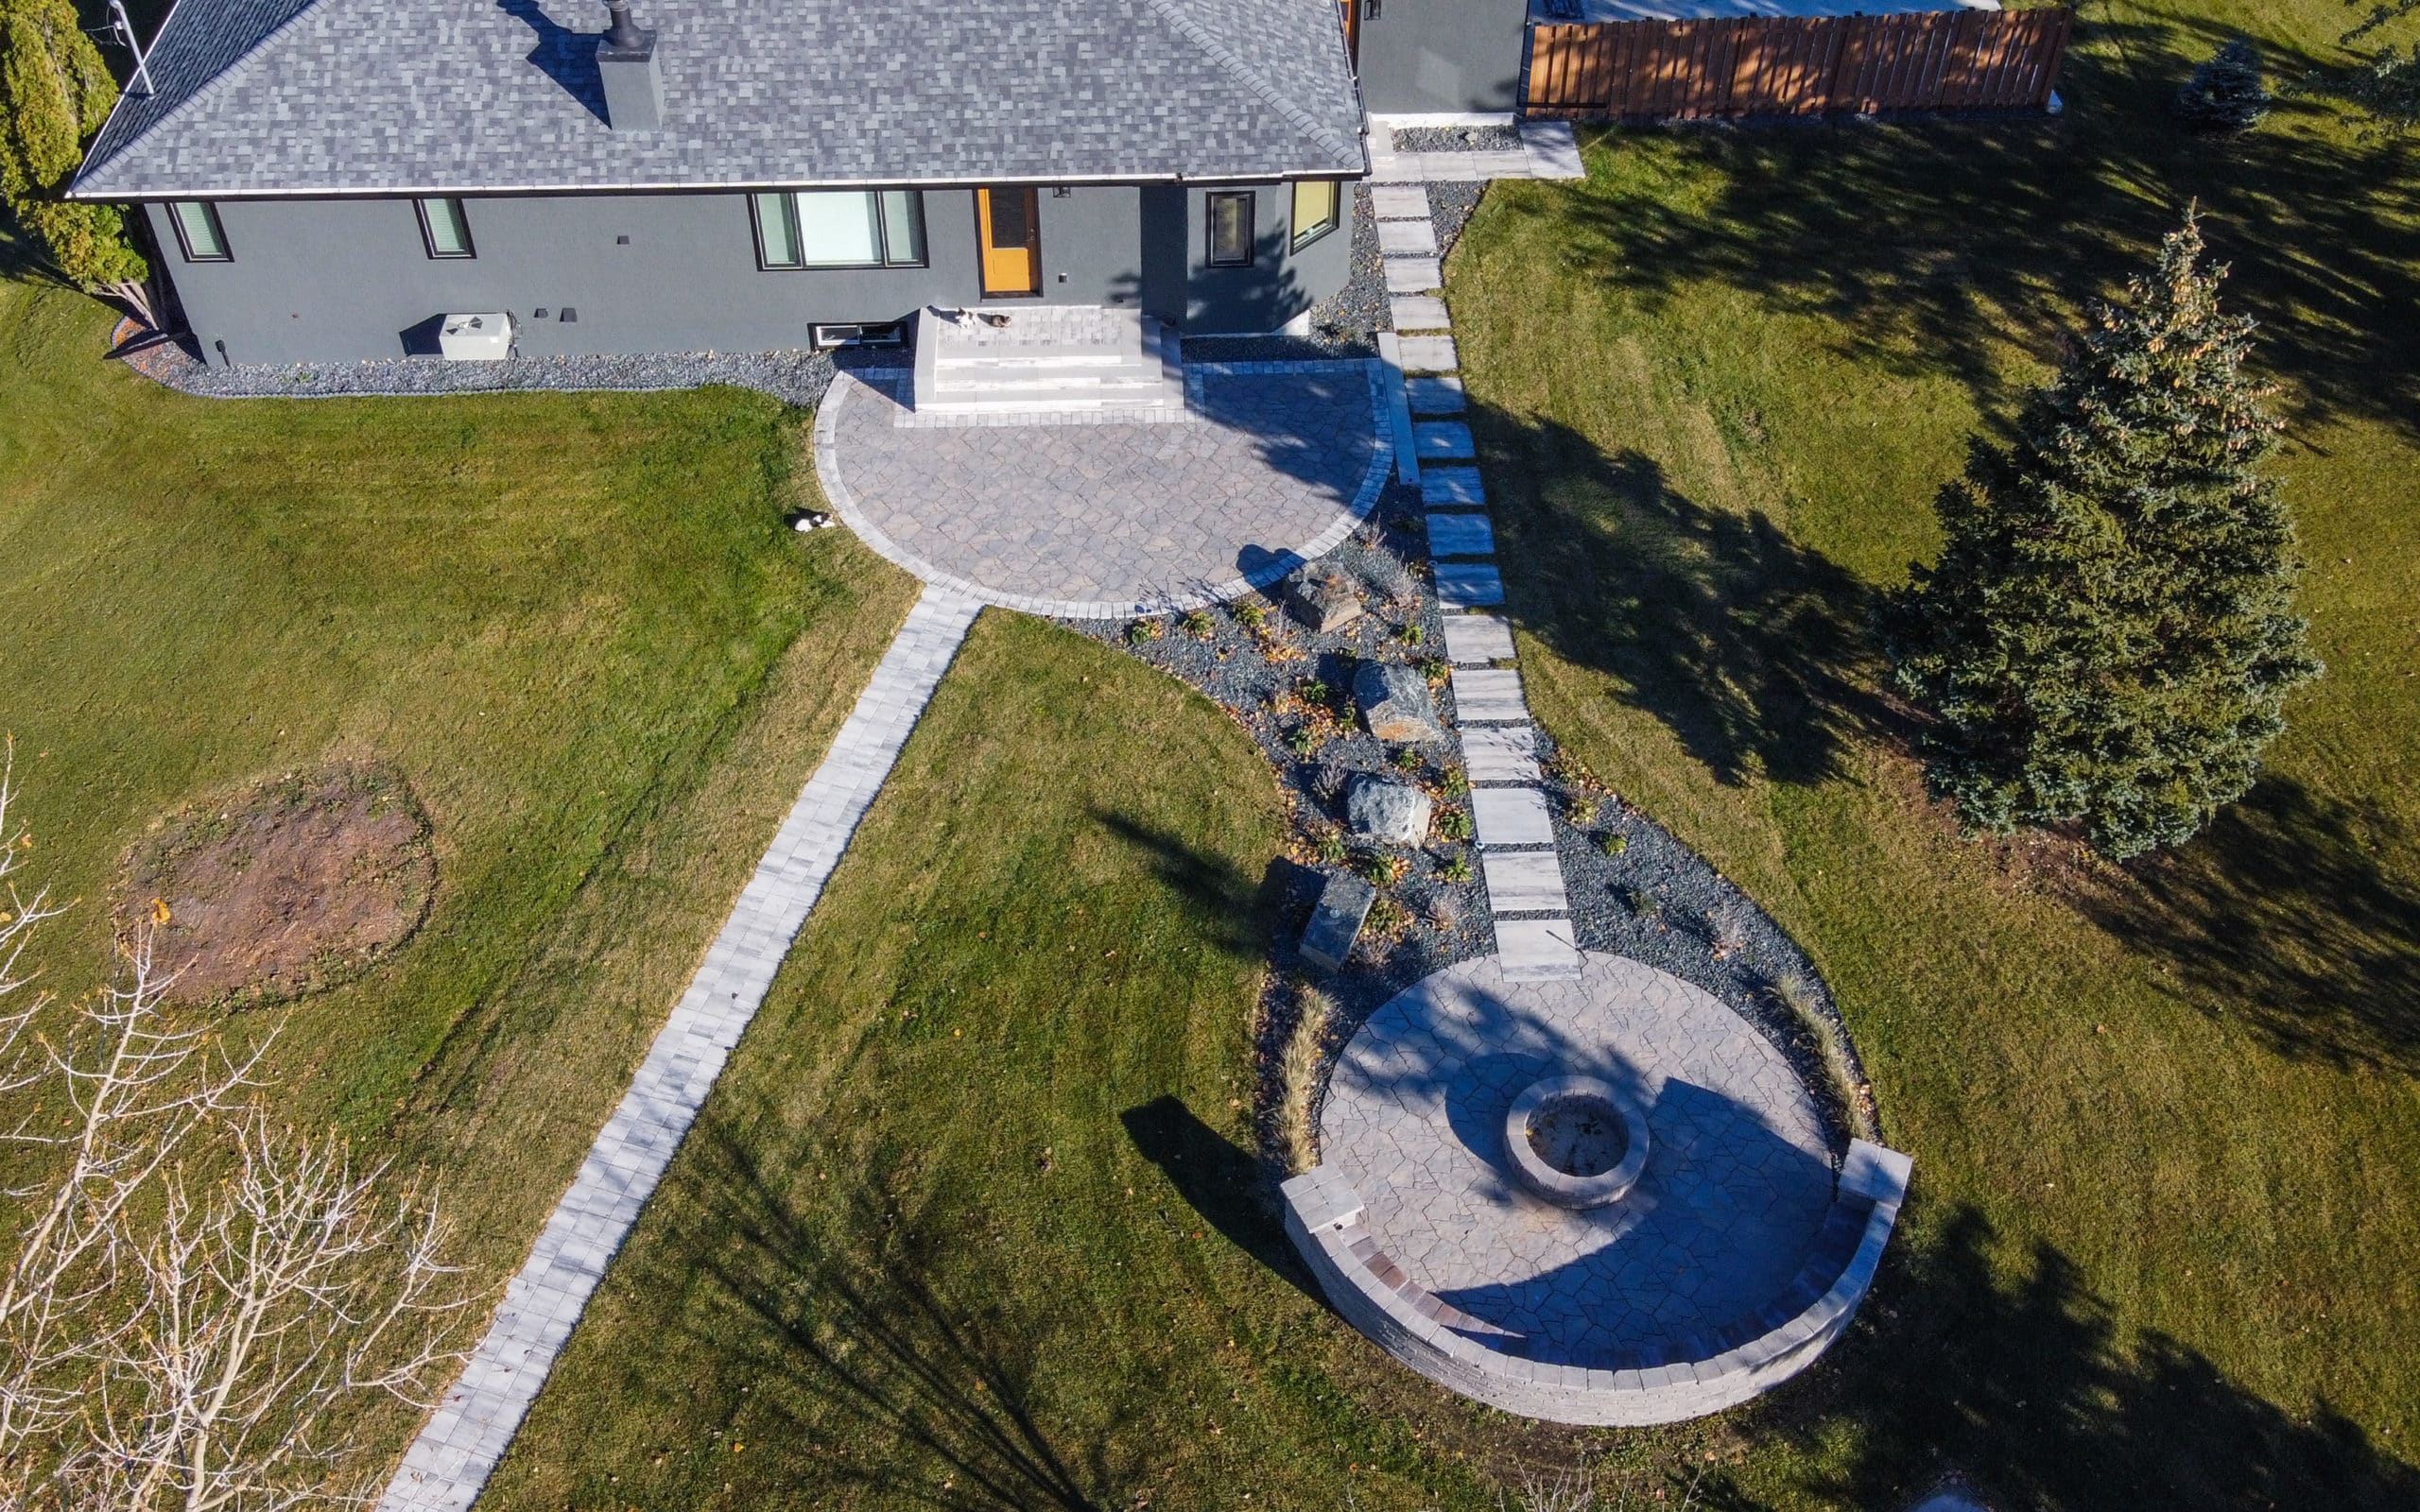 Ariel view of stone patio and stone pathway leading to a fire pit in Winnipeg landscaped yard.